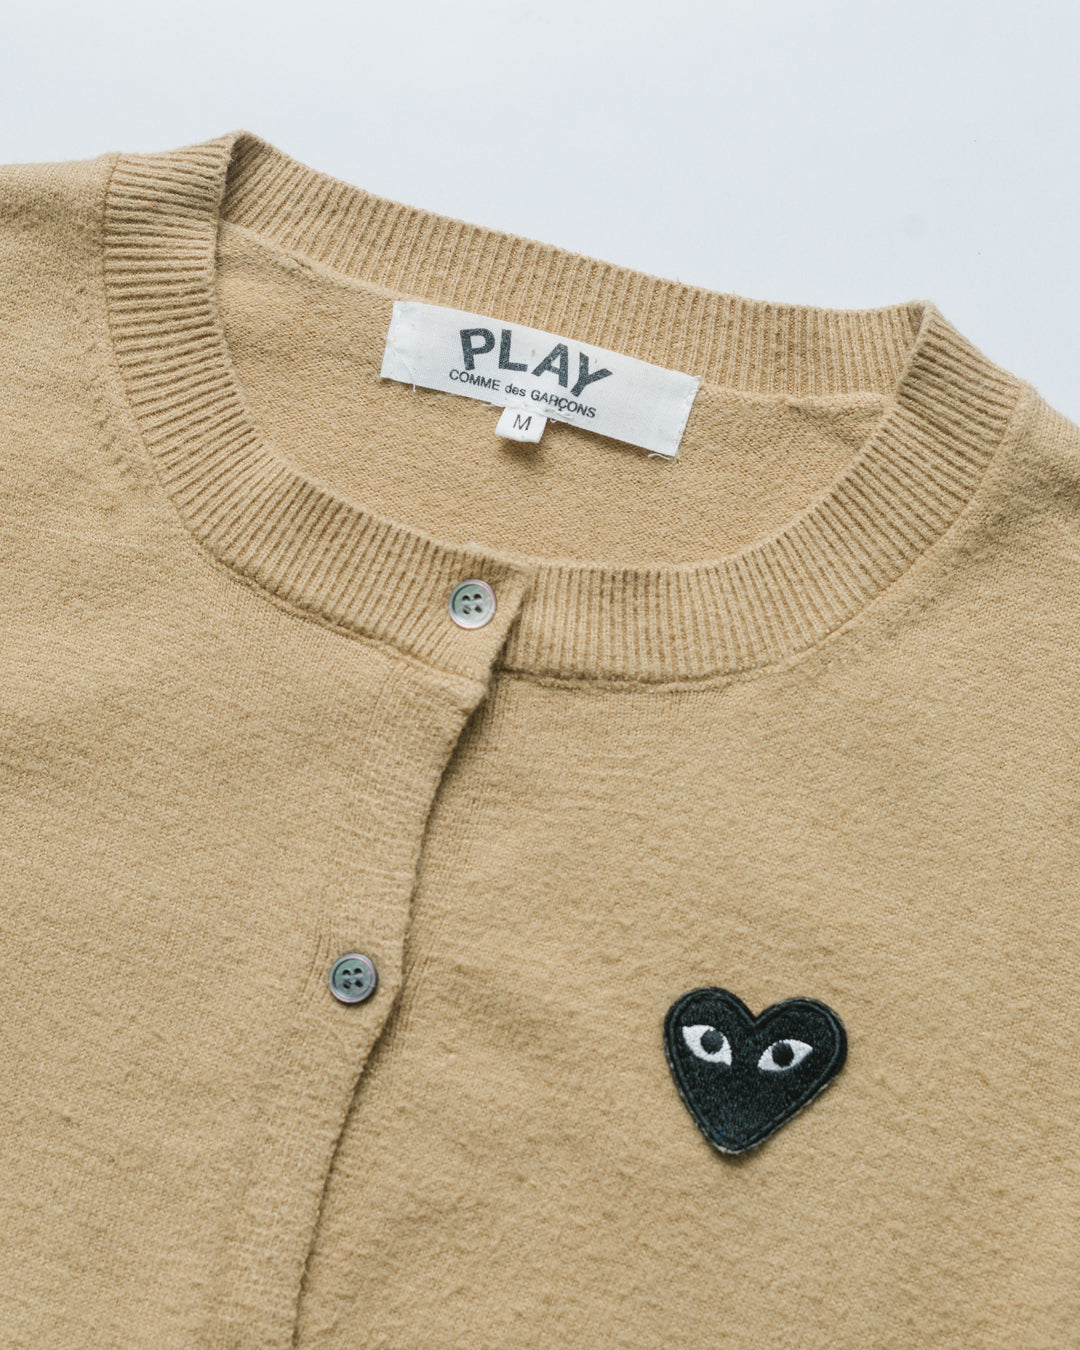 !Play by Comme Des Garcons